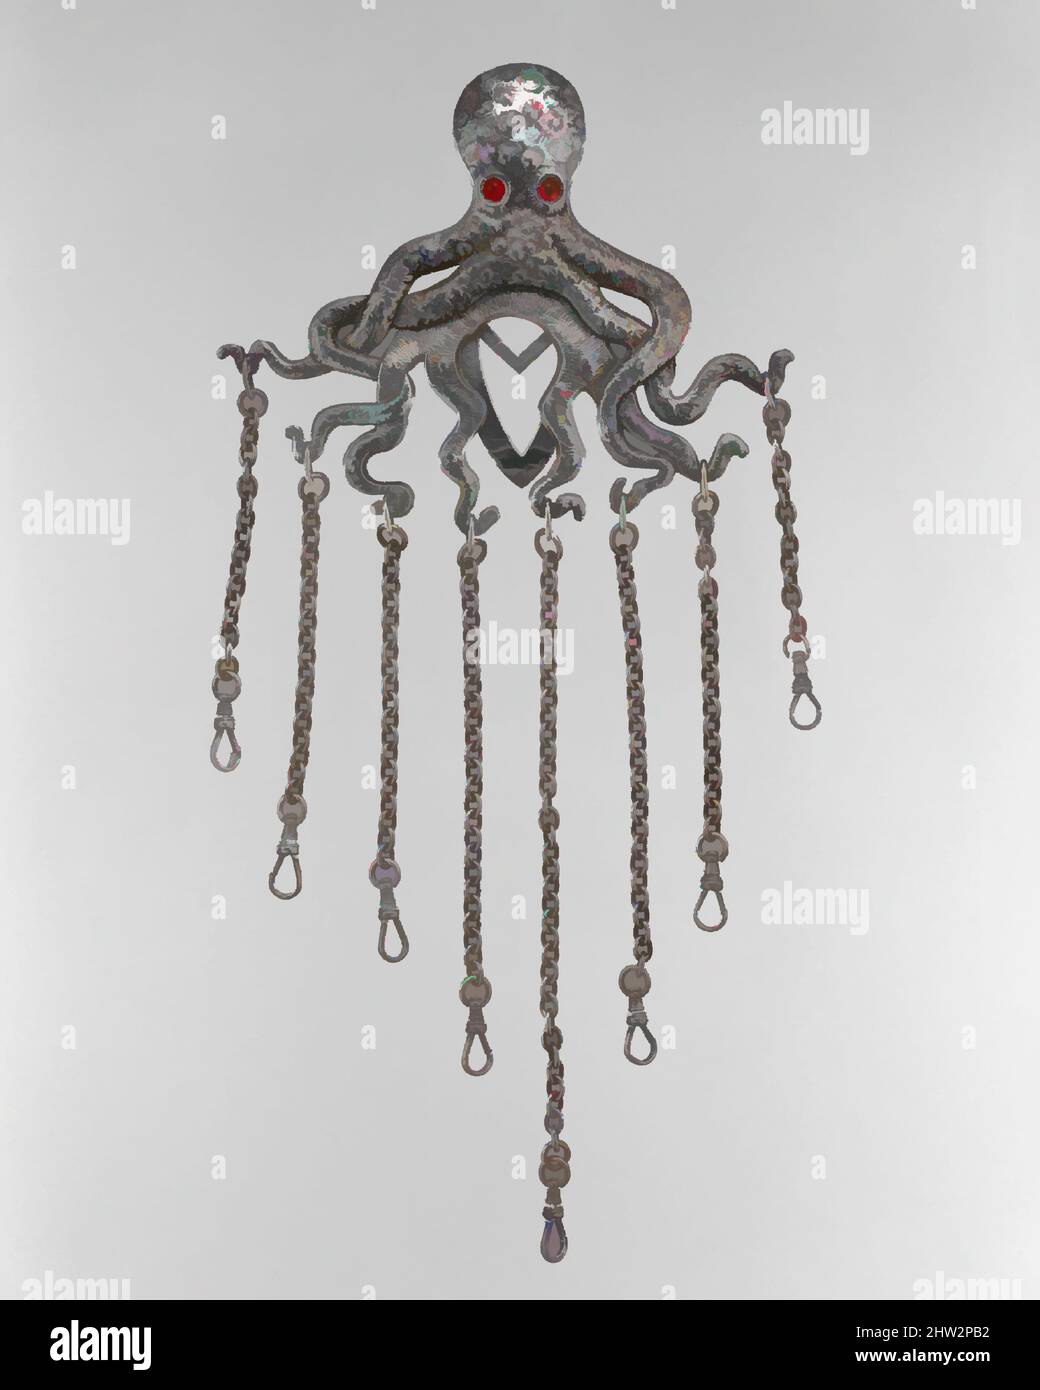 Art inspired by Chatelaine, 1887, Made in Providence, Rhode Island, United States, American, Silver, red glass, and black beads, W. 4 3/4 in. (12.1 cm), Jewelry, Gorham Manufacturing Company (American, 1831–present, Classic works modernized by Artotop with a splash of modernity. Shapes, color and value, eye-catching visual impact on art. Emotions through freedom of artworks in a contemporary way. A timeless message pursuing a wildly creative new direction. Artists turning to the digital medium and creating the Artotop NFT Stock Photo